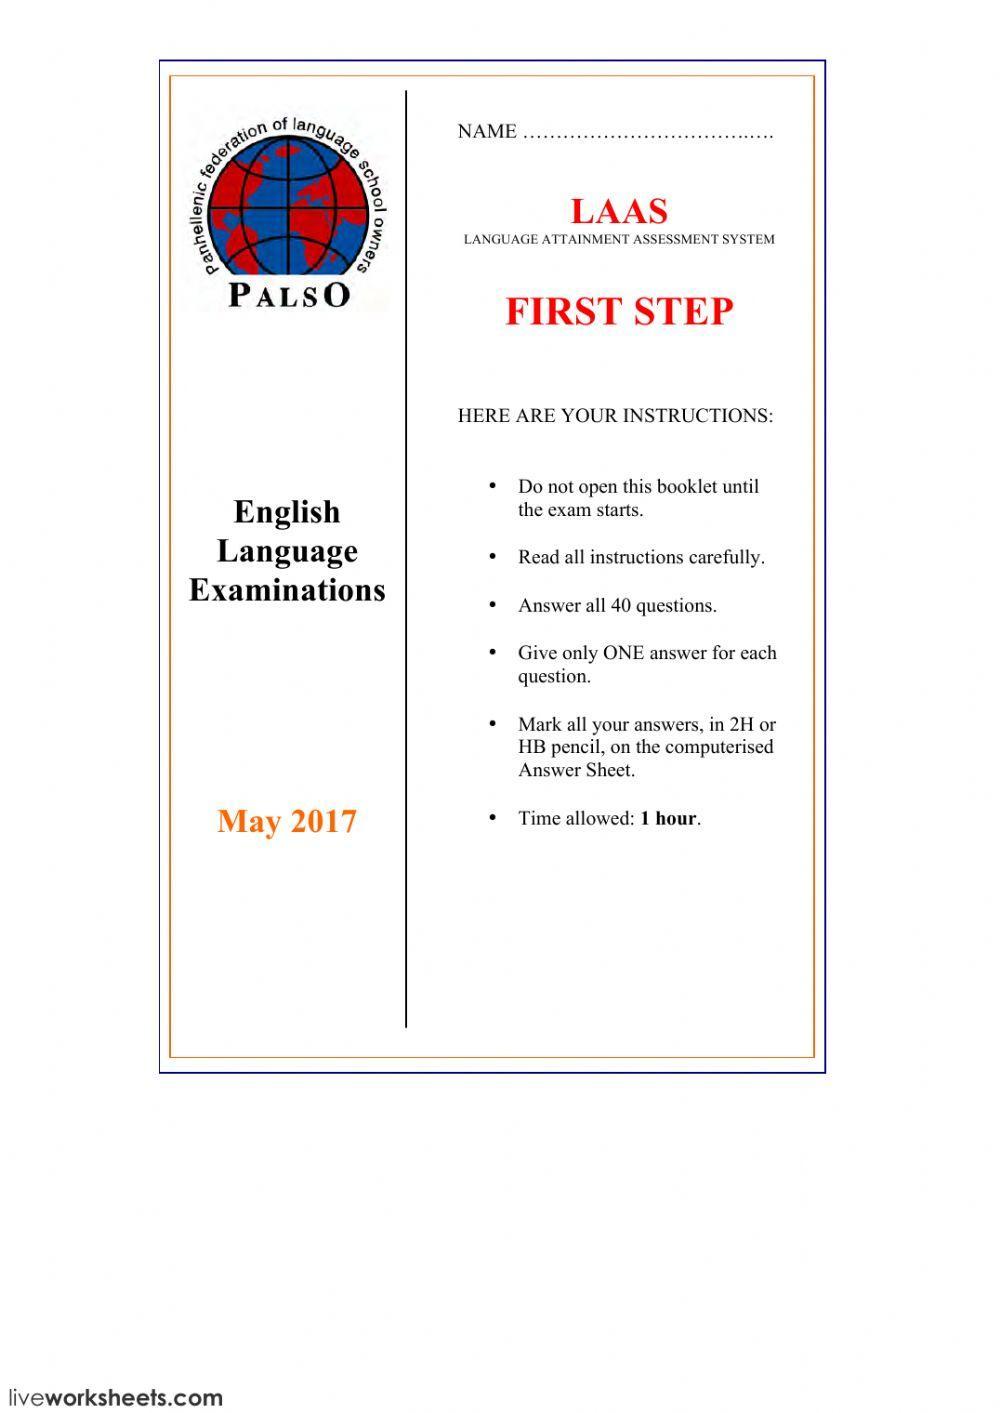 LAAS FIRST STEP MAY 2017